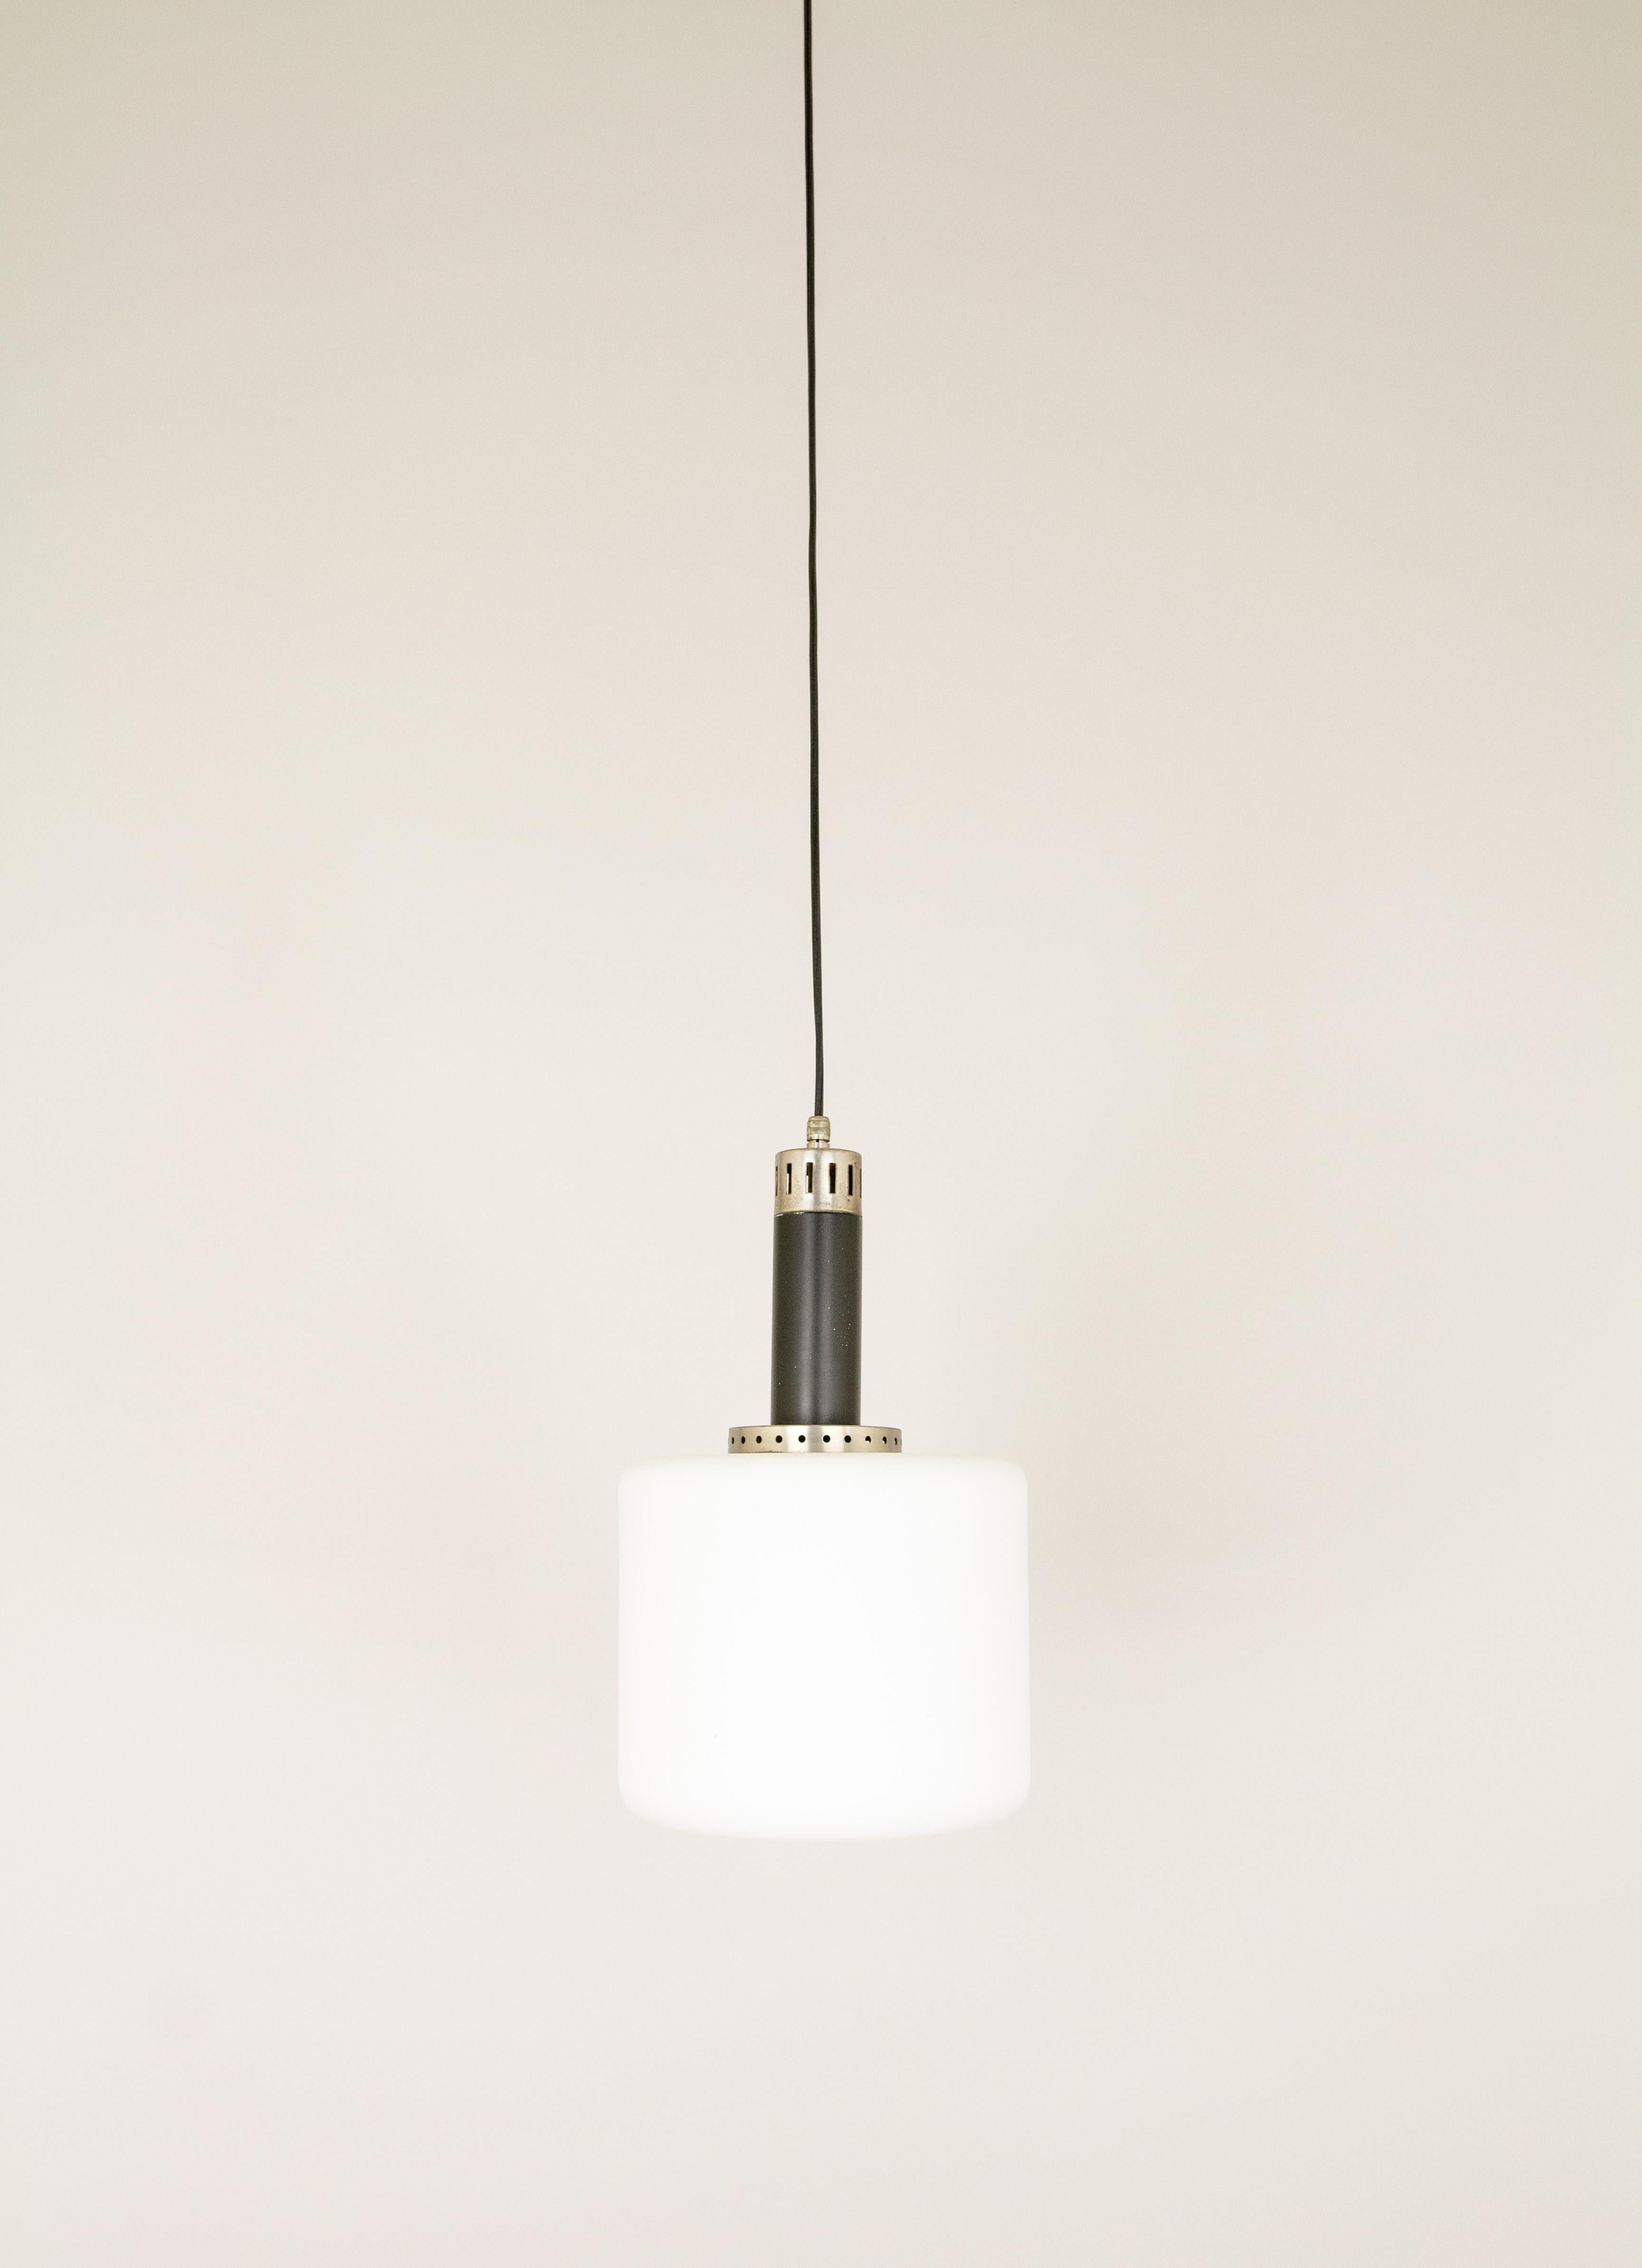 Clean opaline glass pendant designed by Stilnovo from the 1950s. 

It is composed of a cylindrical lampshade with a metal stem and detailing.

The lamp is in good vintage condition, with some small marks on the black part of the stem.